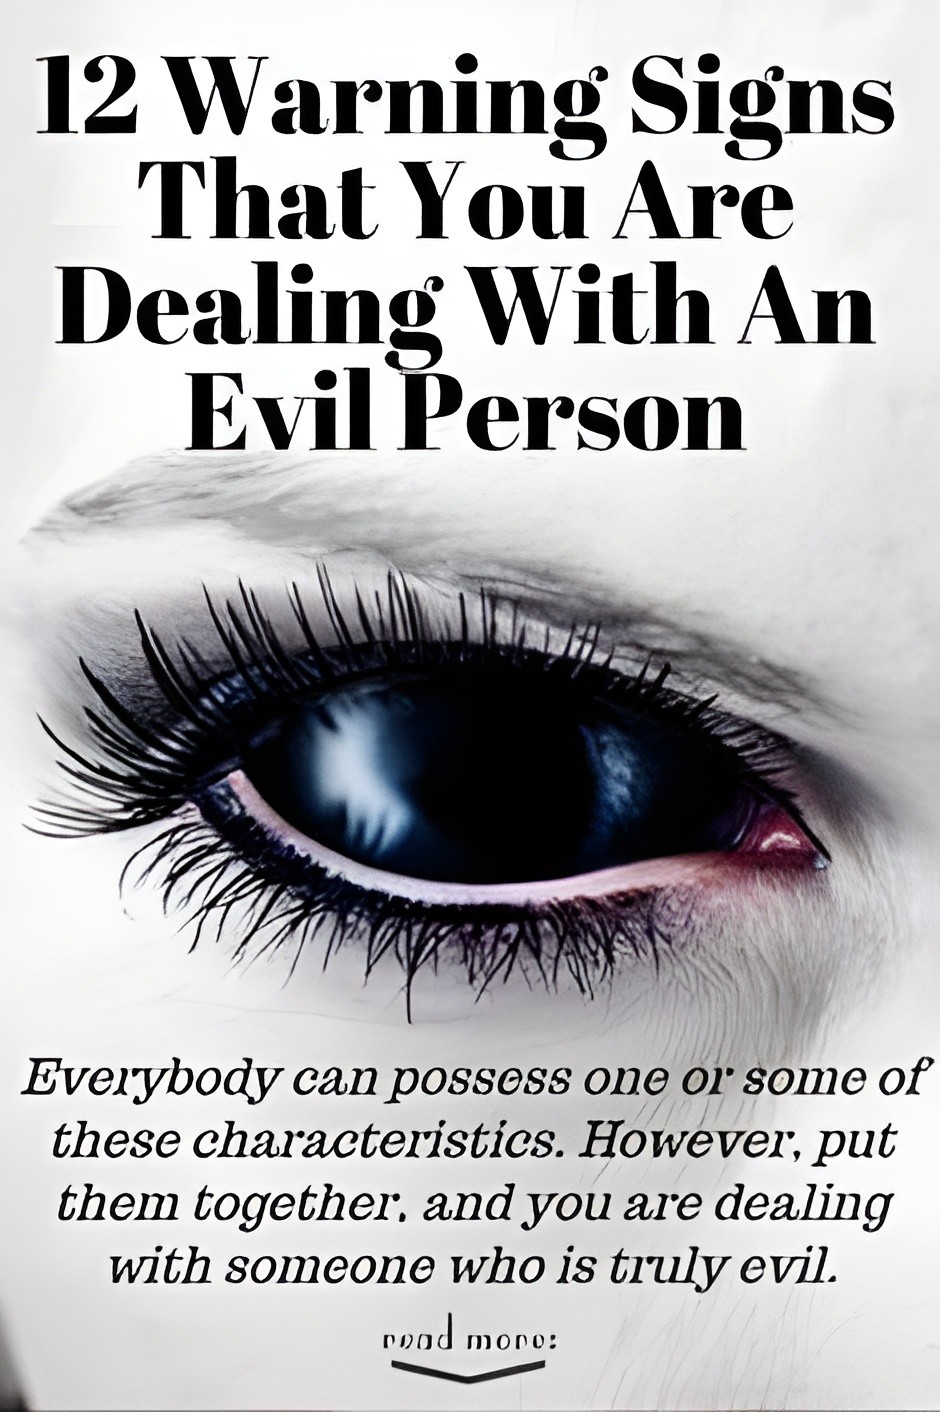 12 Warning Signs That You Are Dealing With An Evil Person